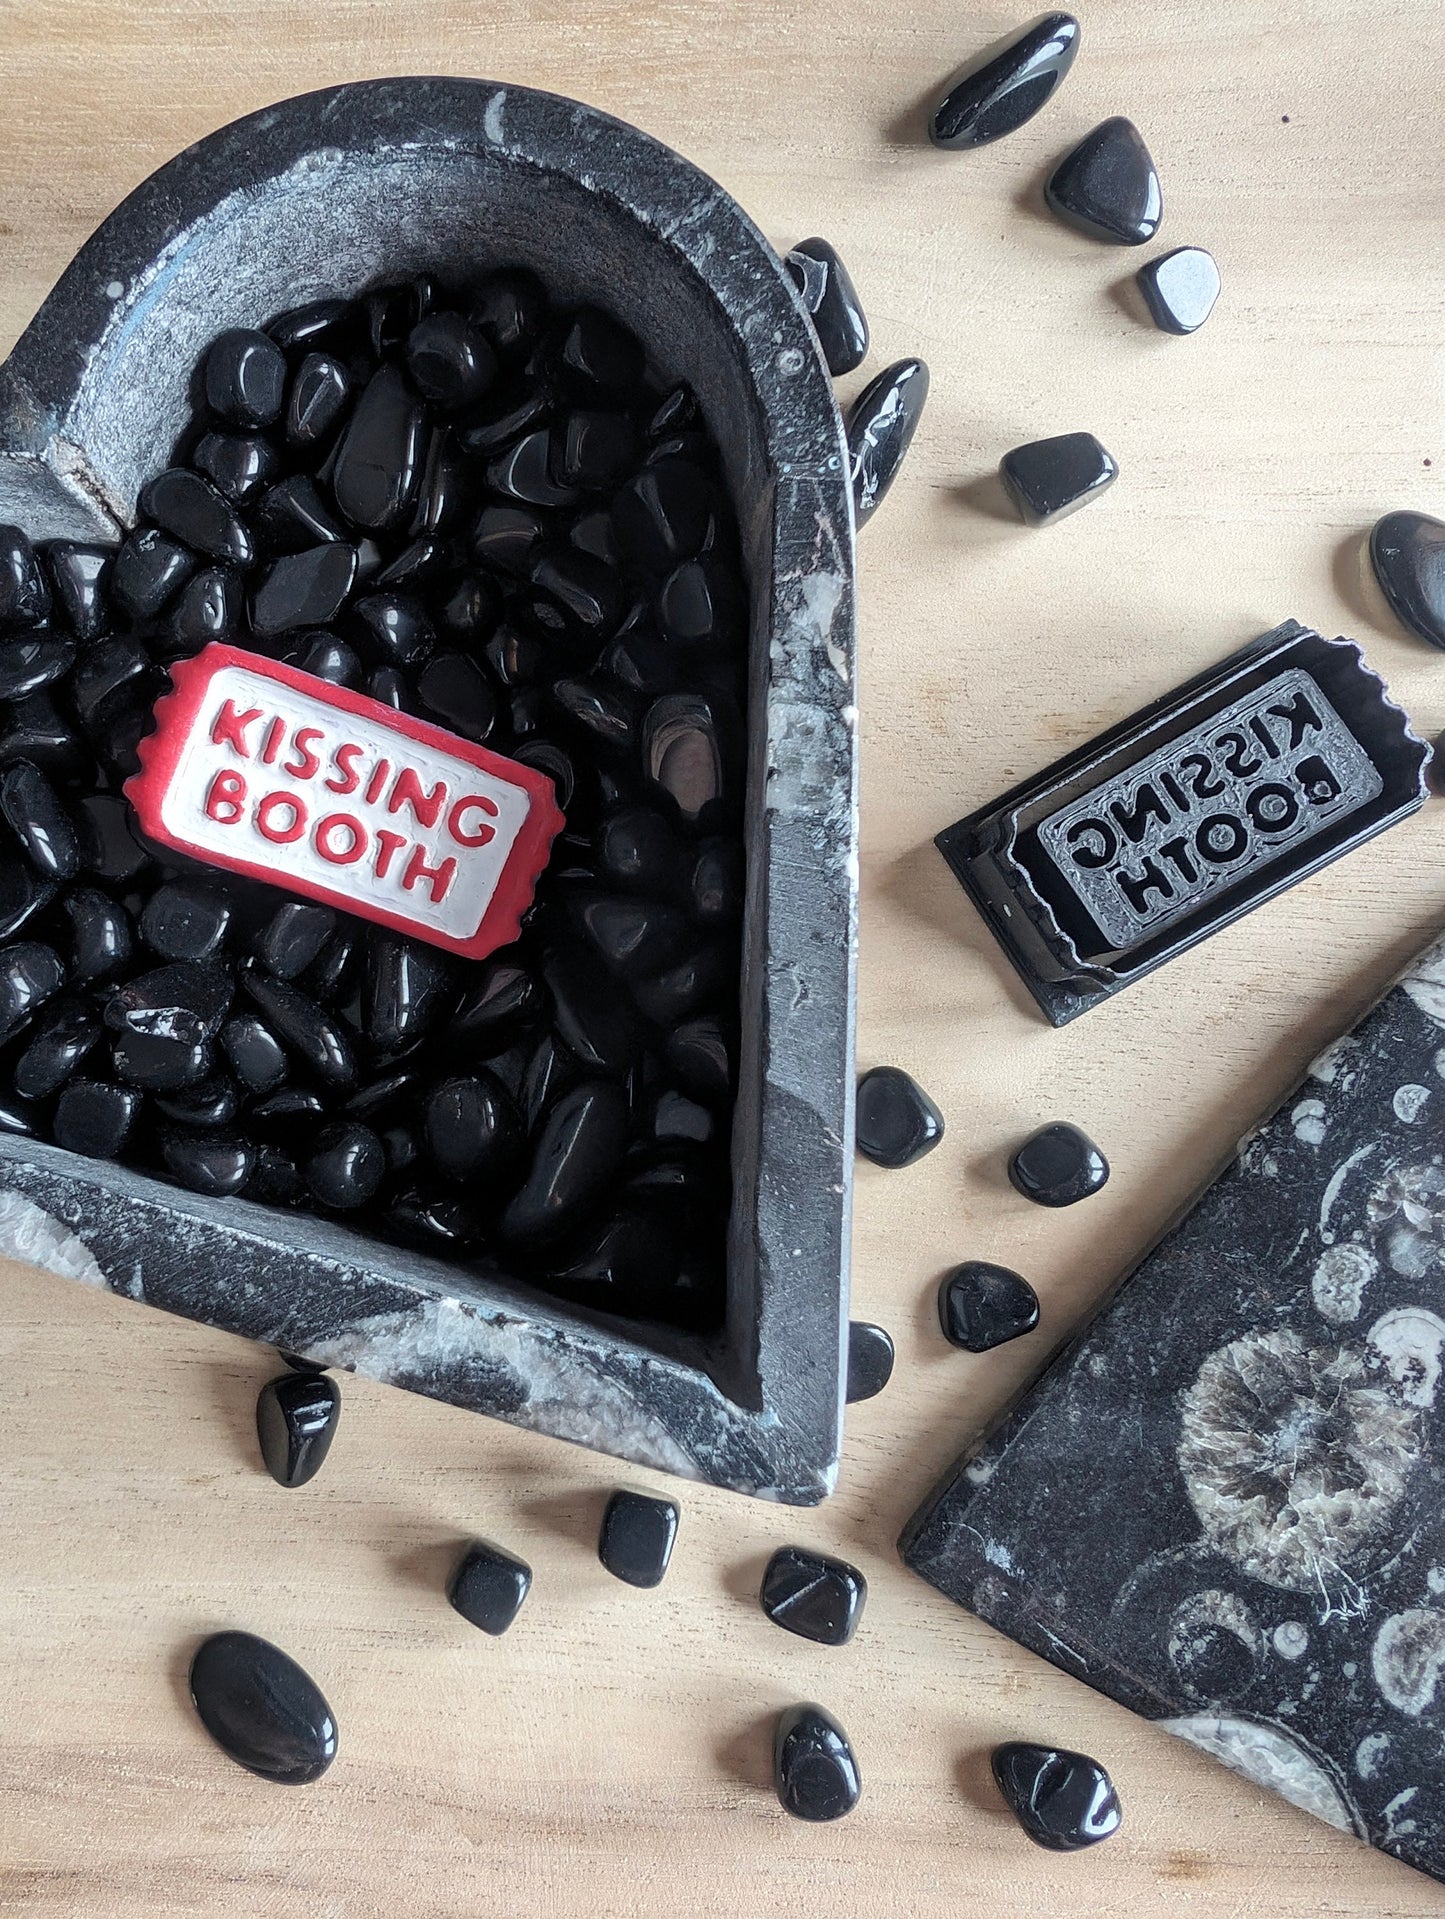 Kissing Booth Carnival Ticket Sharp Clay Cutter